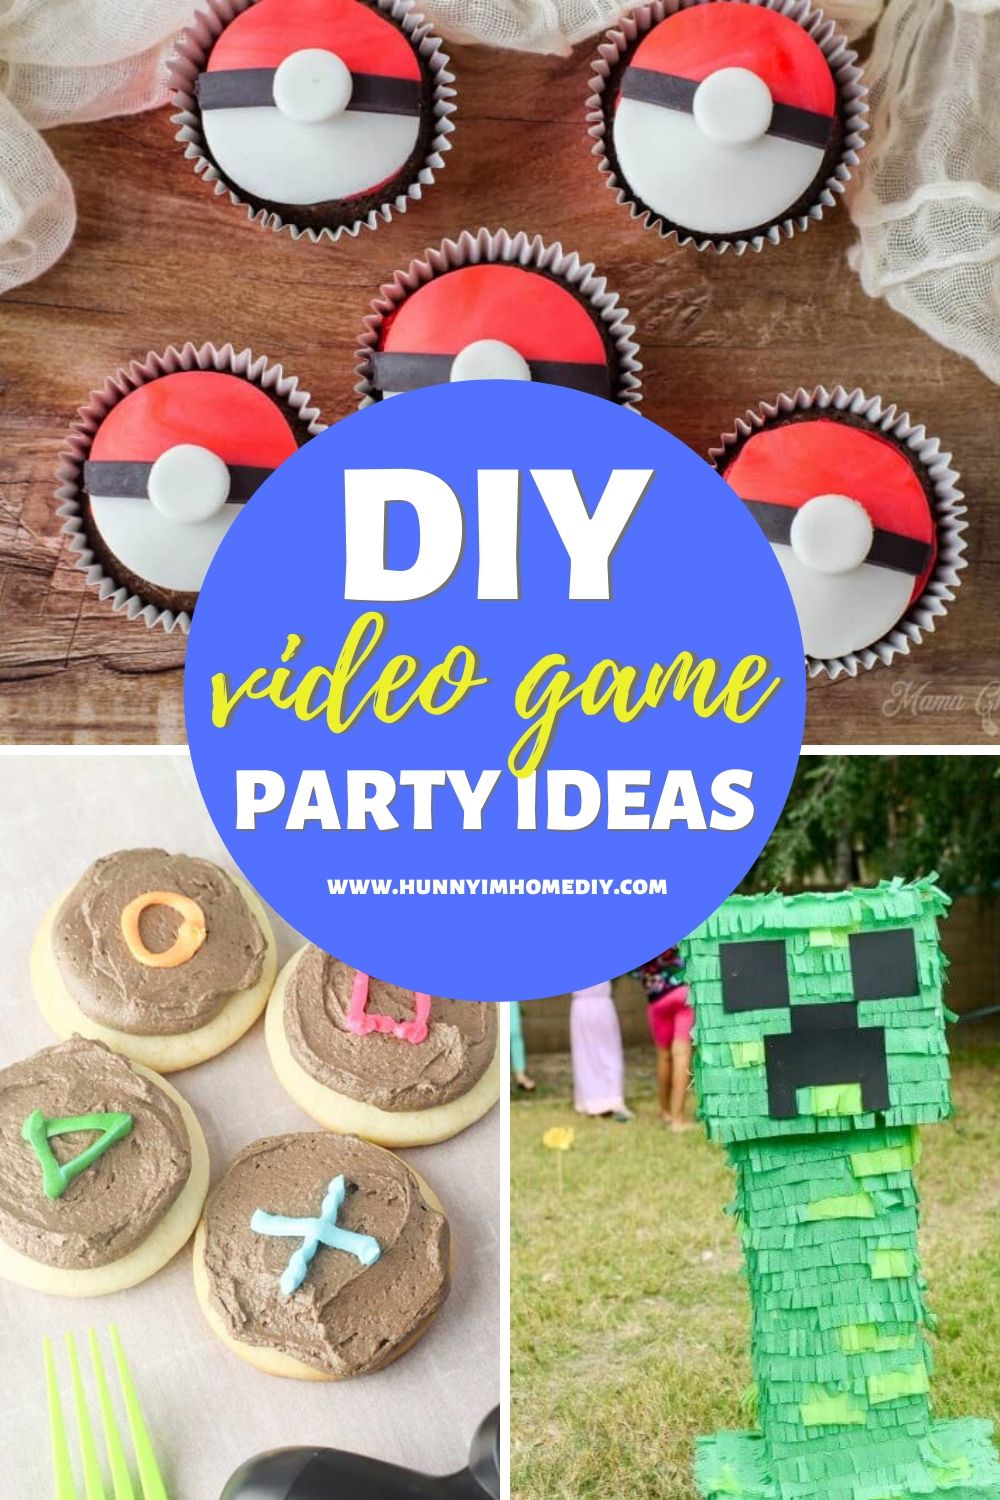 25 Awesome DIY Video Game Party Ideas | Hunny I'm Home